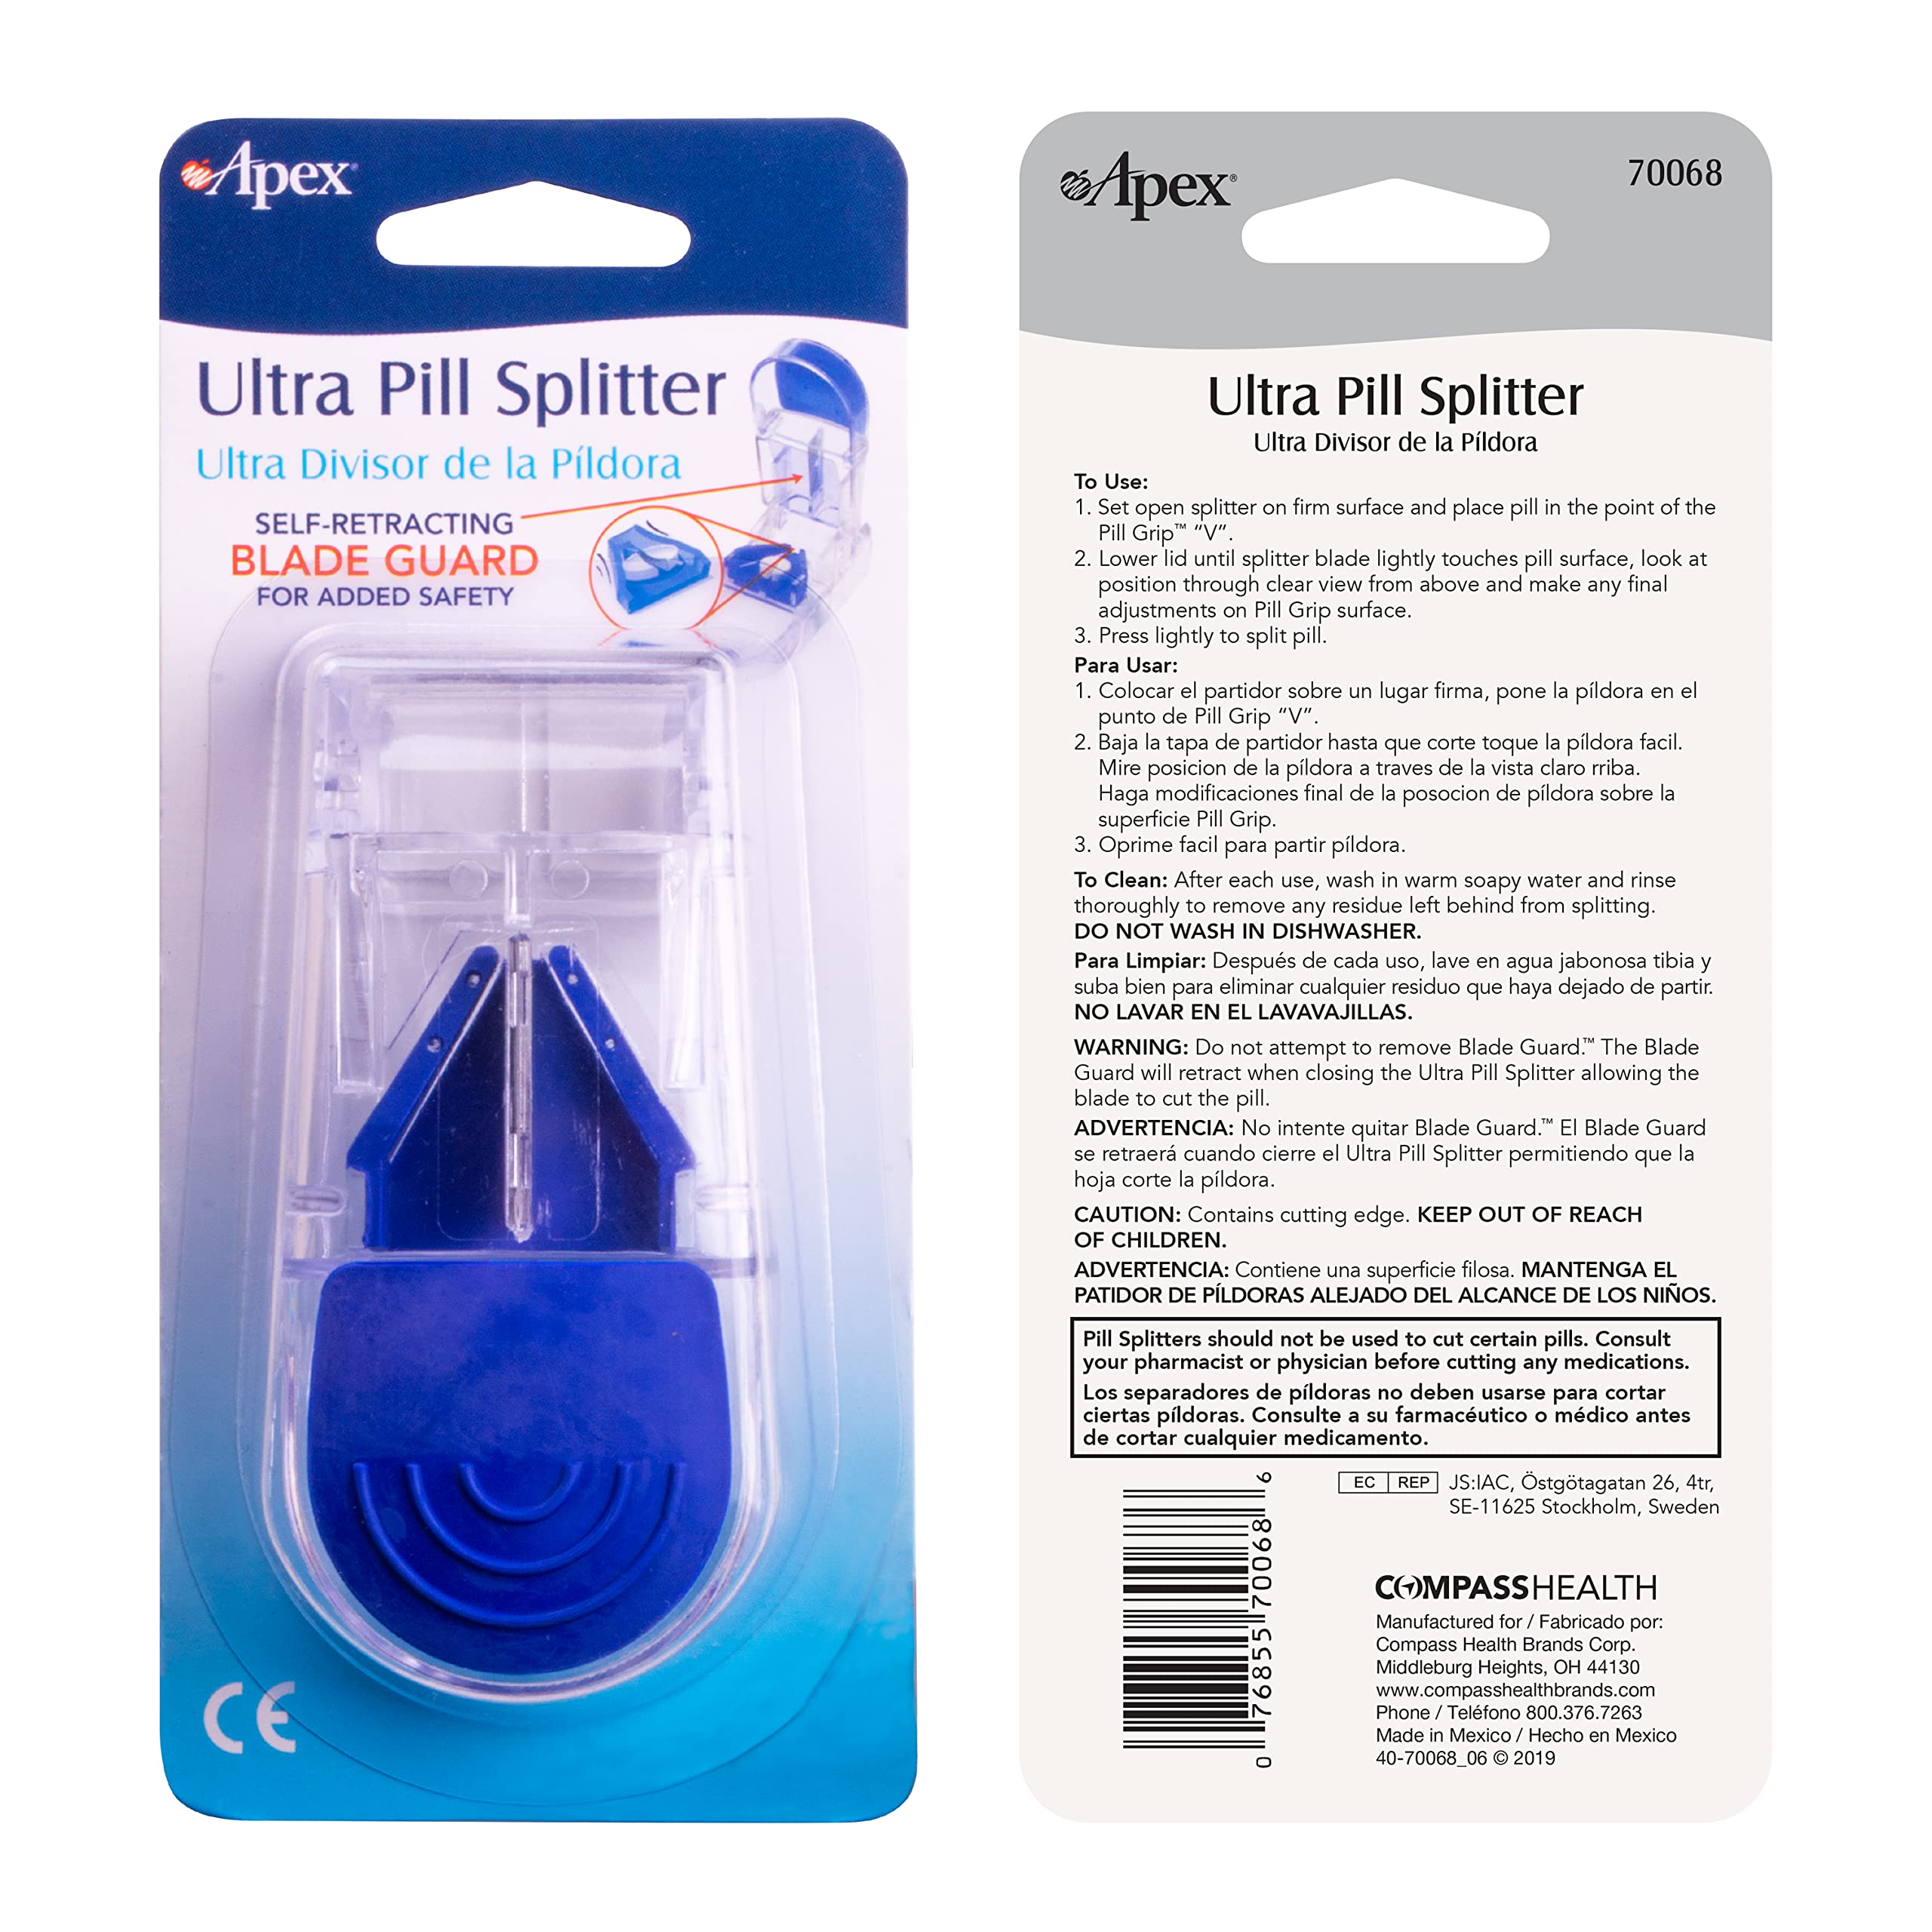 Apex Ultra Pill Cutter - Pill Splitter With Retracting Blade Guard - For Cutting Small Pills or Large Pills In Half, Blue/Green and Clear, 1 Count, Assorted Colors